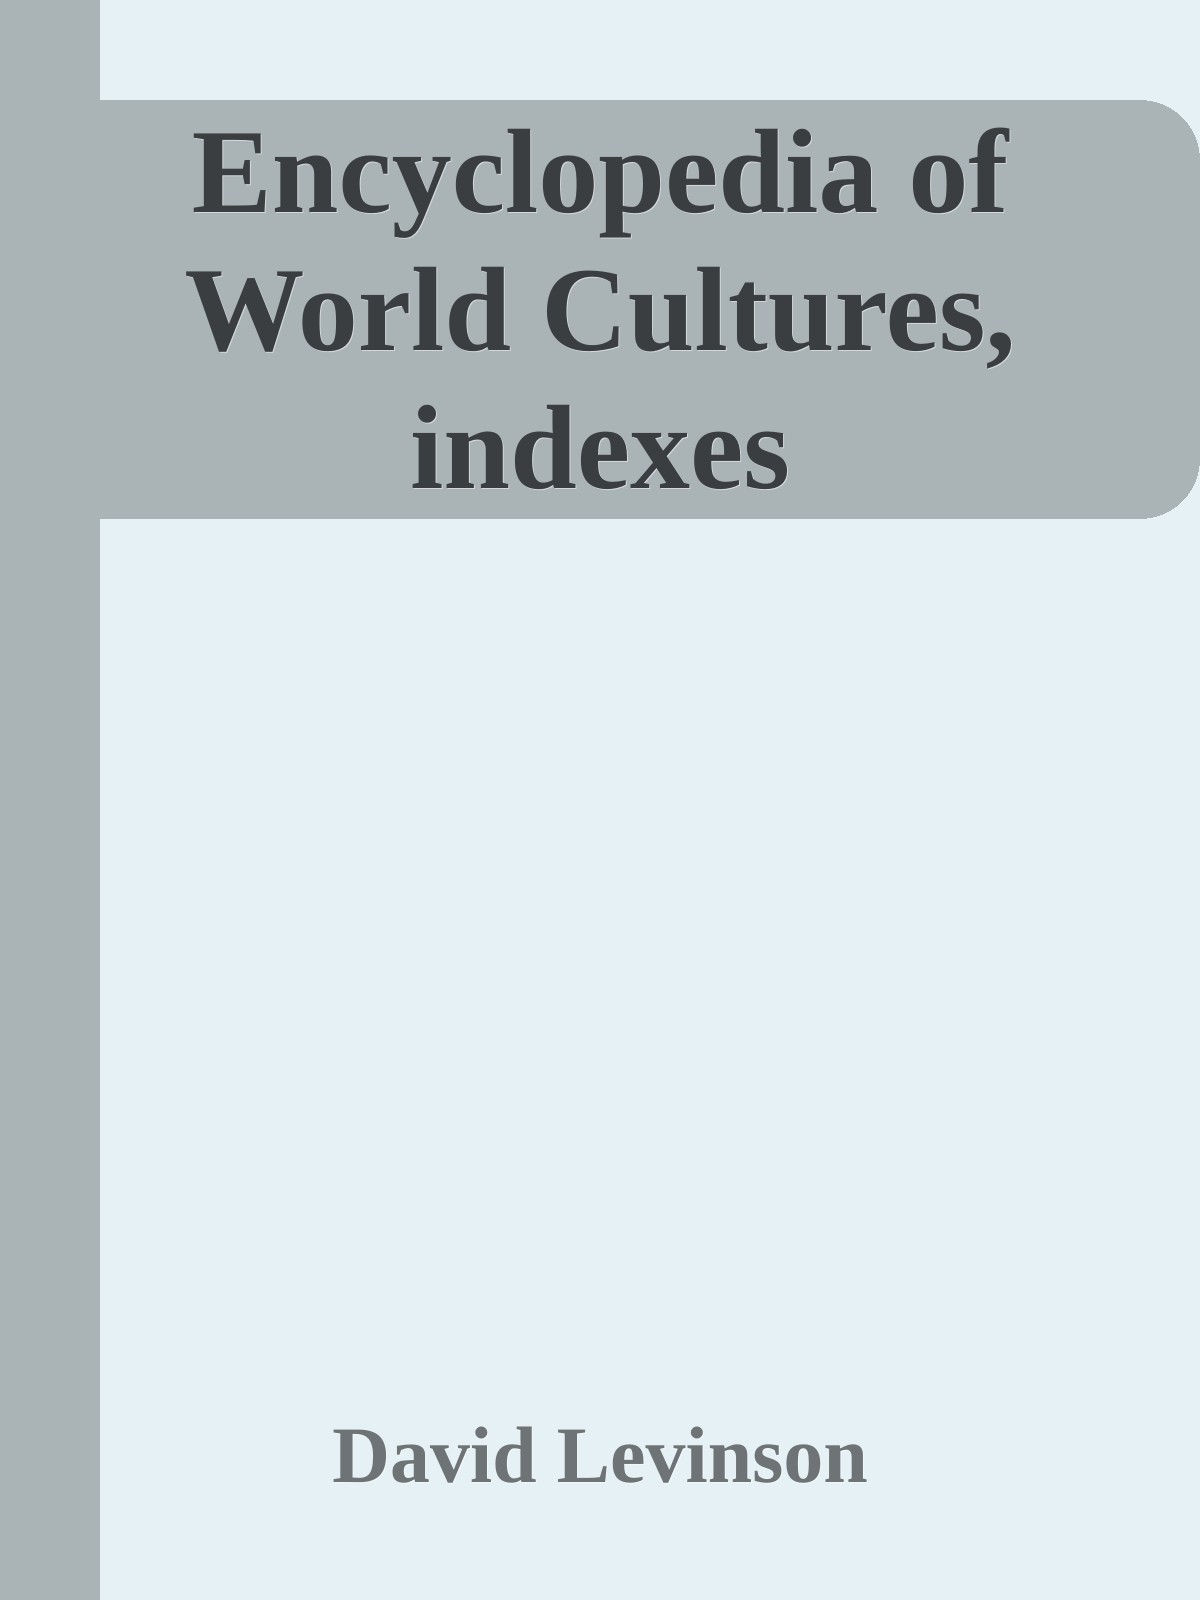 Encyclopedia of World Cultures, indexes